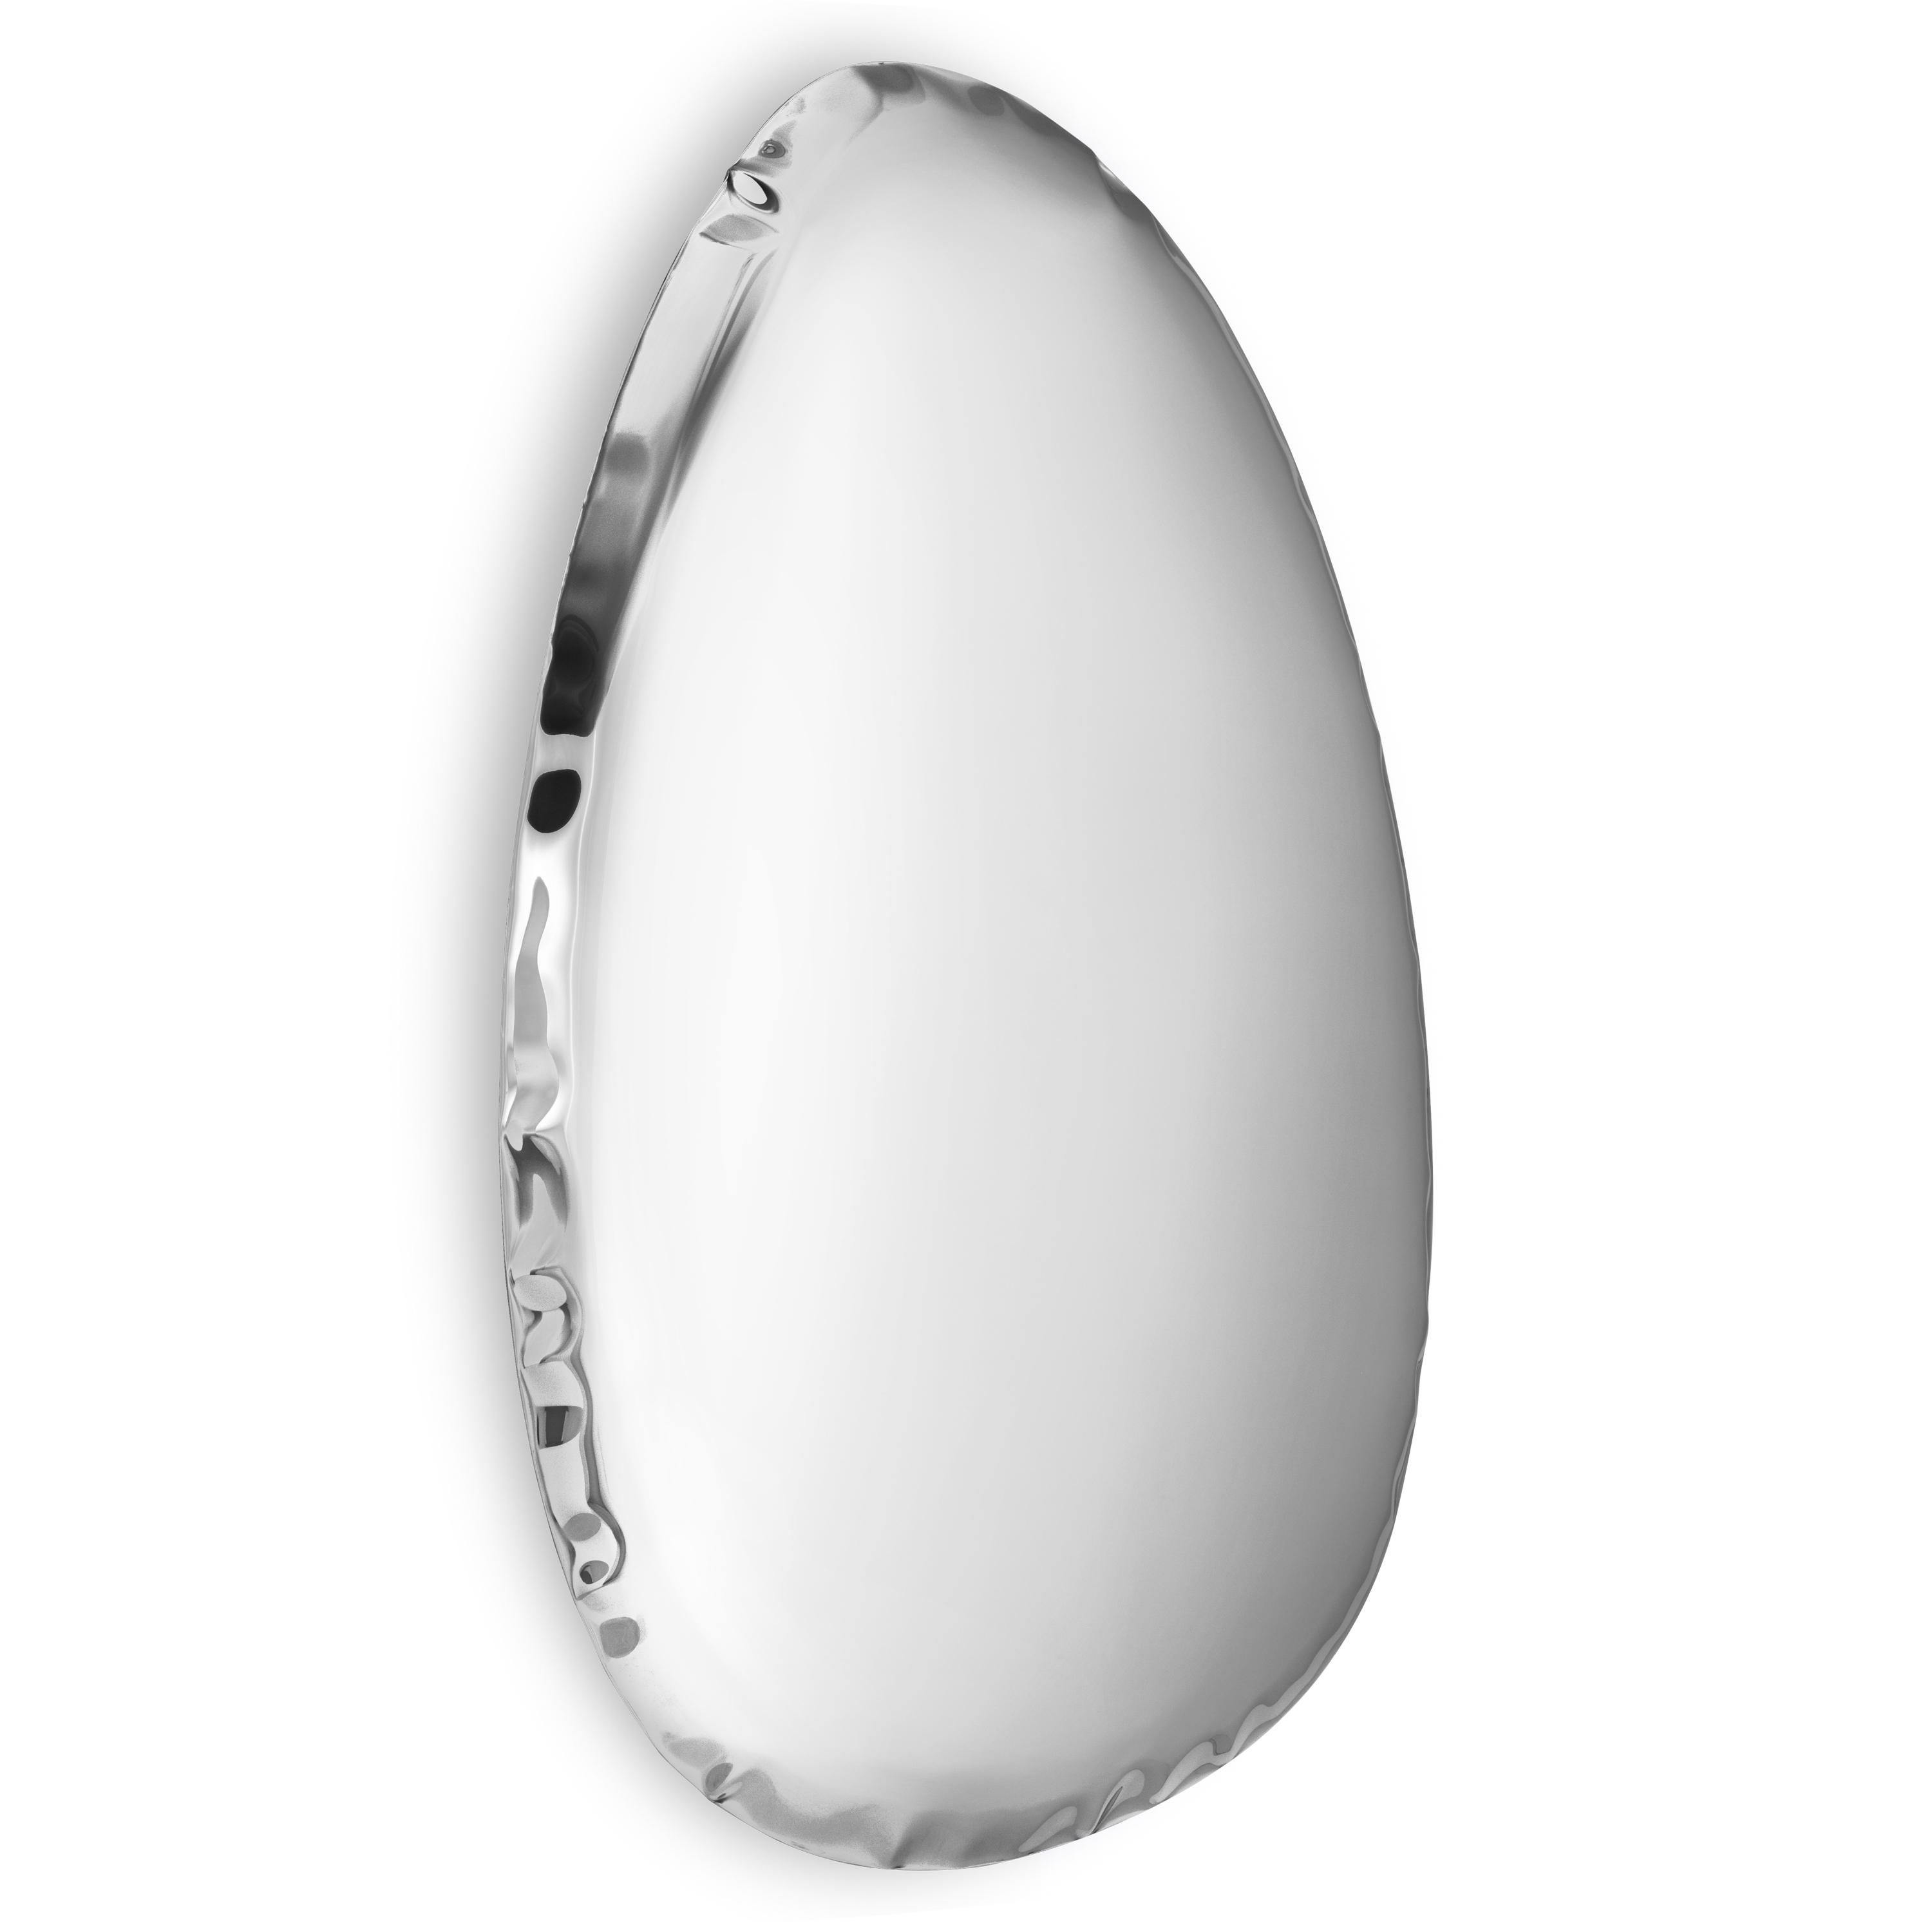 Stainless steel tafla O4.5 wall mirror by Zieta
Dimensions: D 6 x W 57 x H 86 cm 
Material: stainless steel.
Finish: Polished. 
Available finishes: stainless steel, white matt, sapphire/emerald, sapphire, emerald, deep space blue, dark matter, or